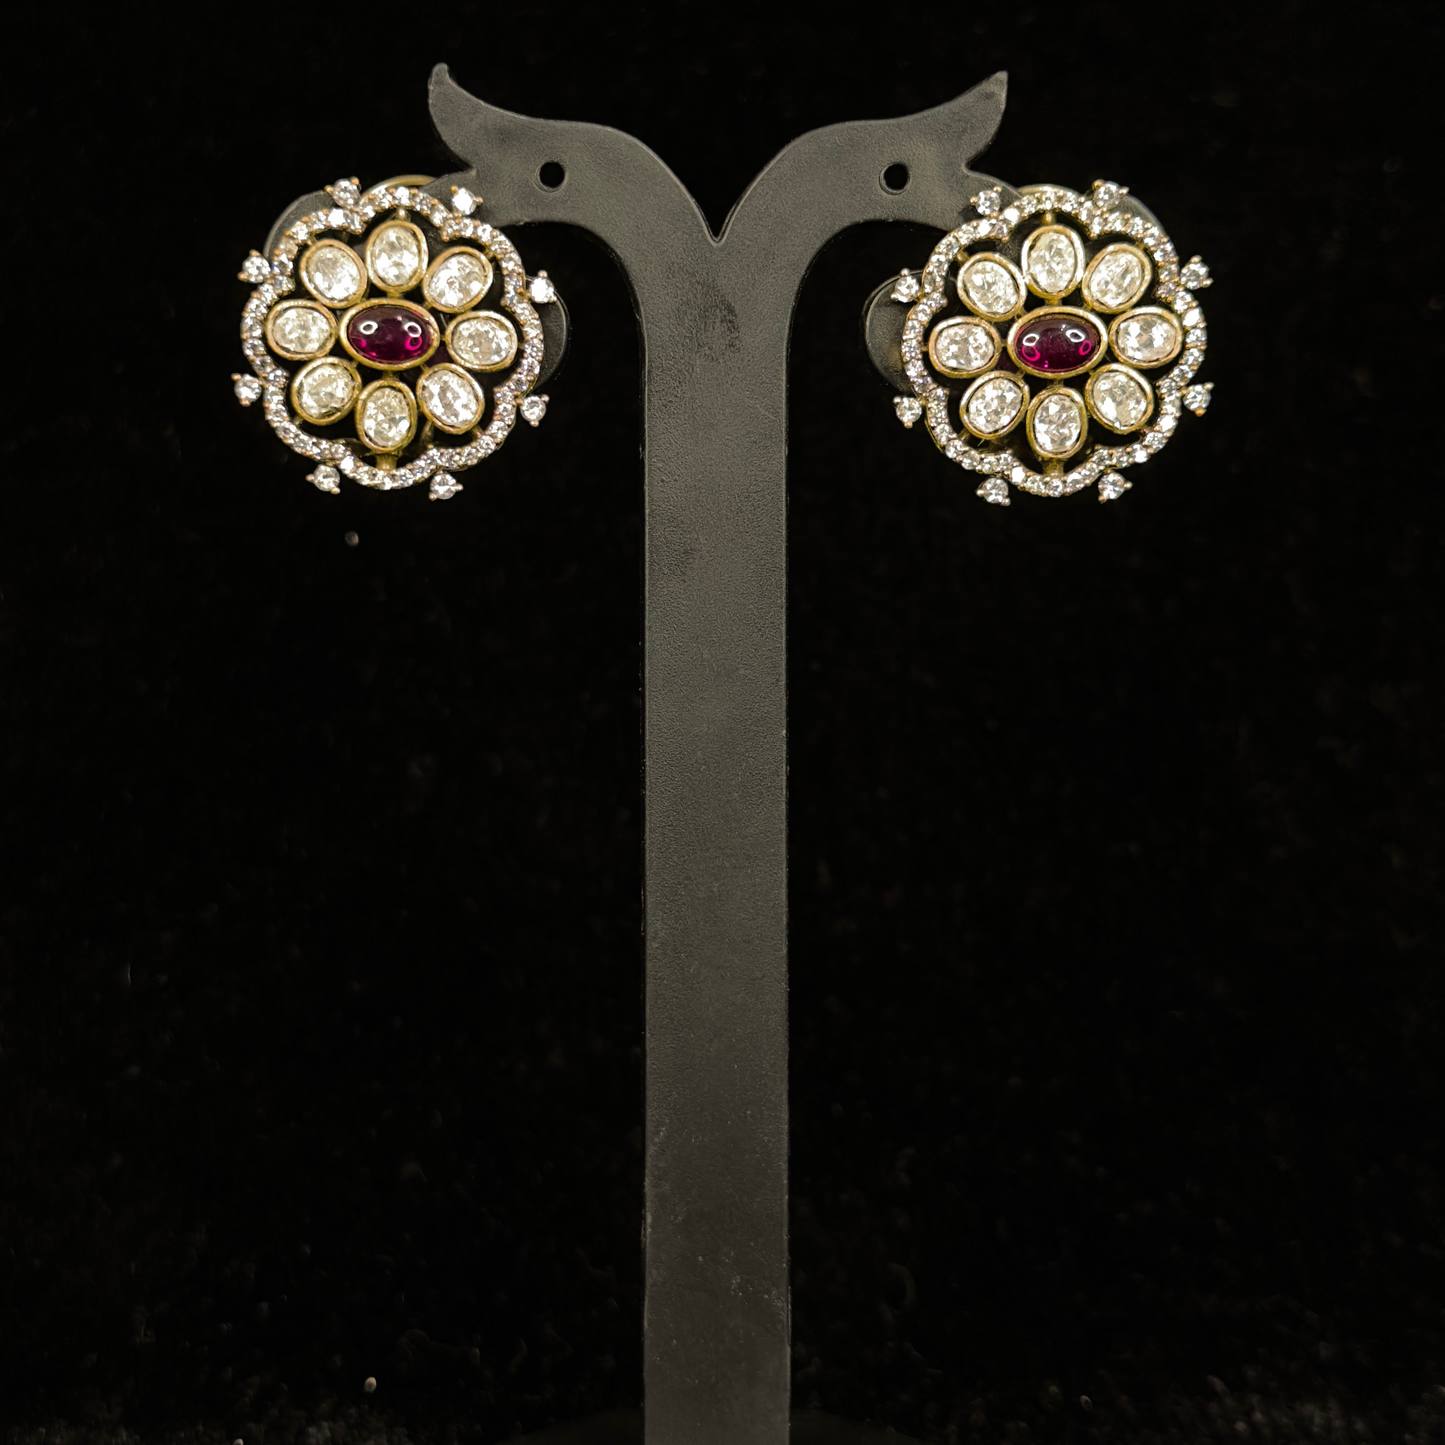 Floral Victorian Zircon Studs in push back style